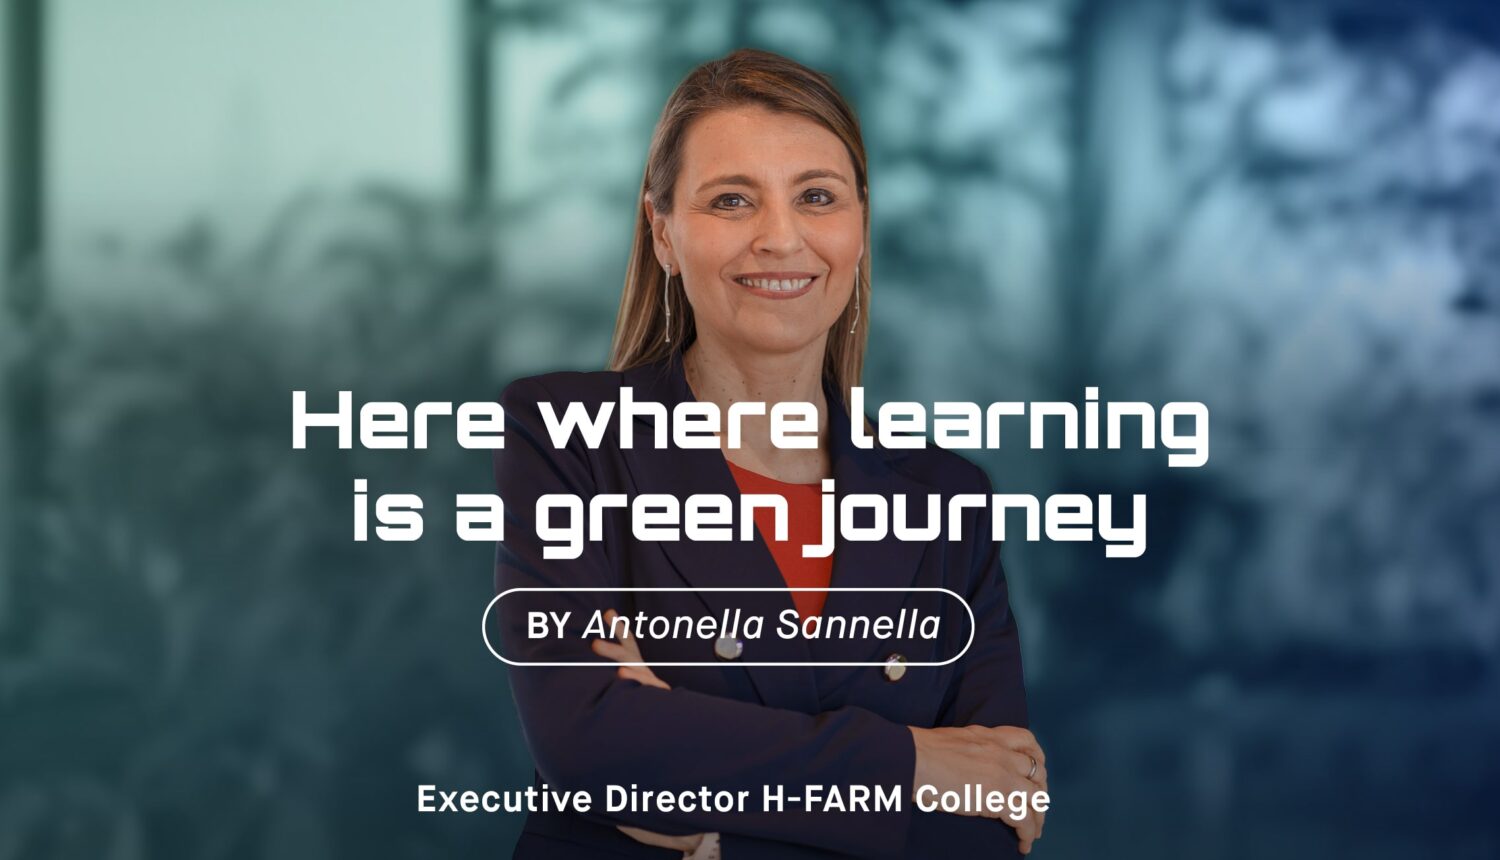 Here where learning is a green journey